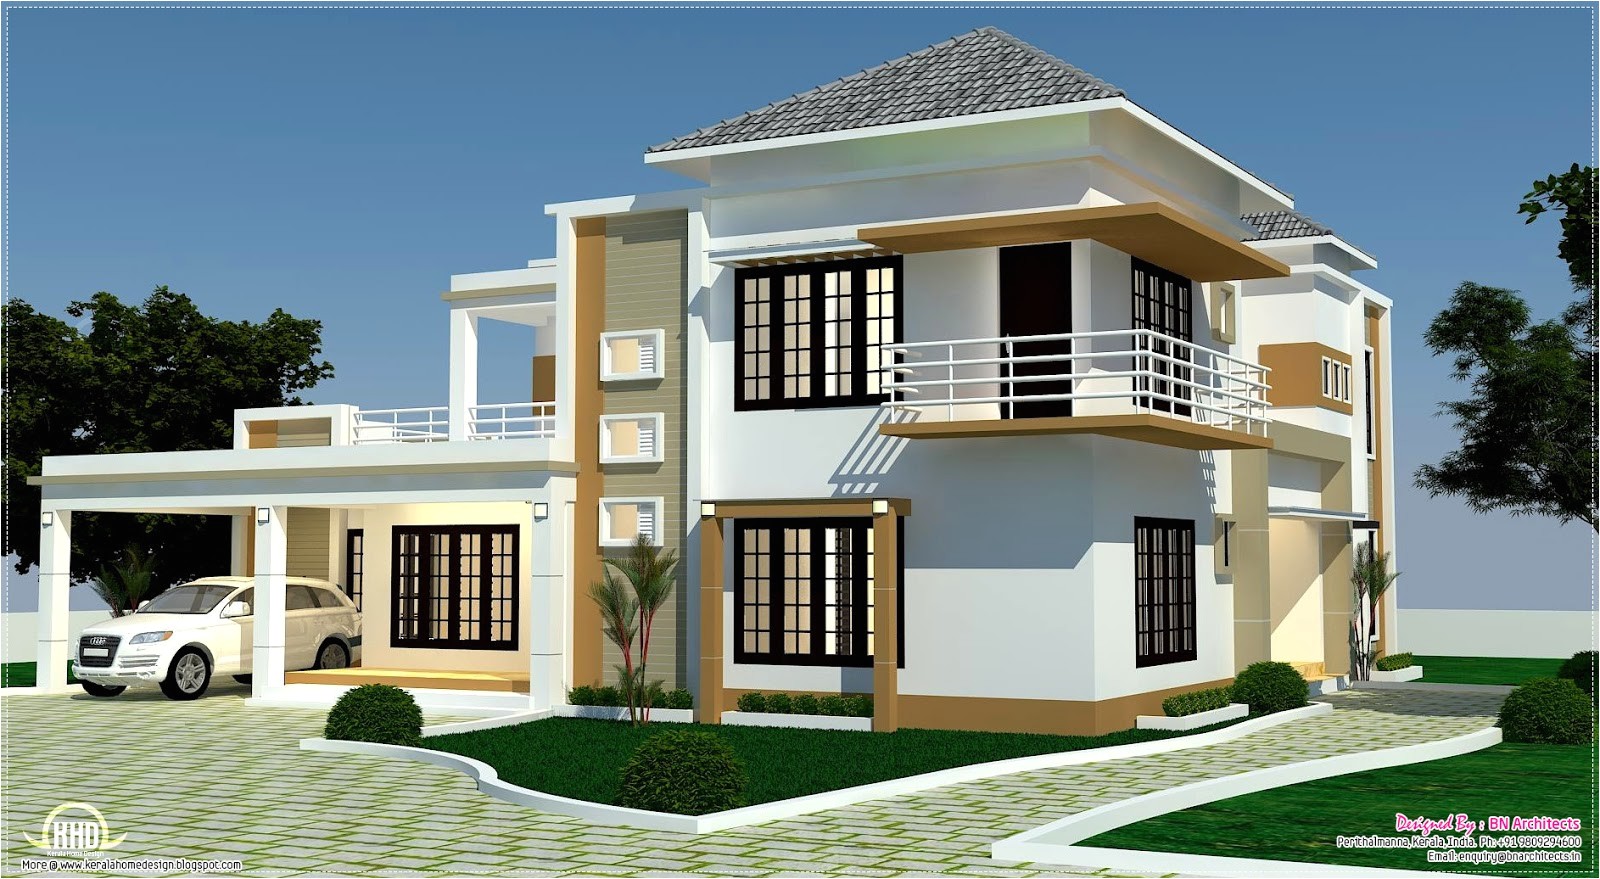 e2cf17966c84b200 4 bedroom house plans nigeria 4 bedroom house plans and 3d view